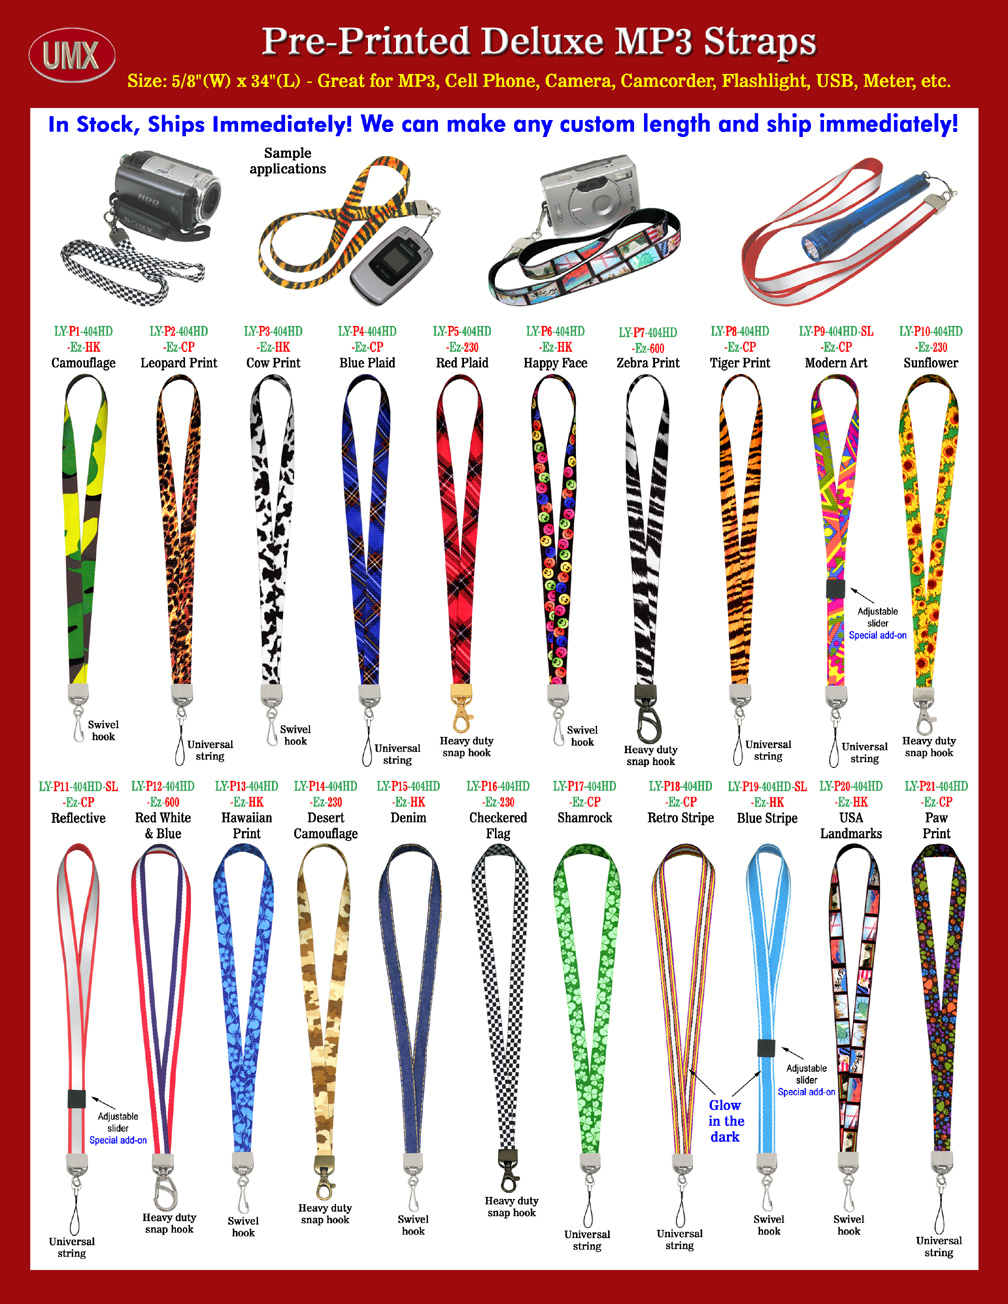 Deluxe Straps: MP3, CD, iPod or Digital Music Player Straps.